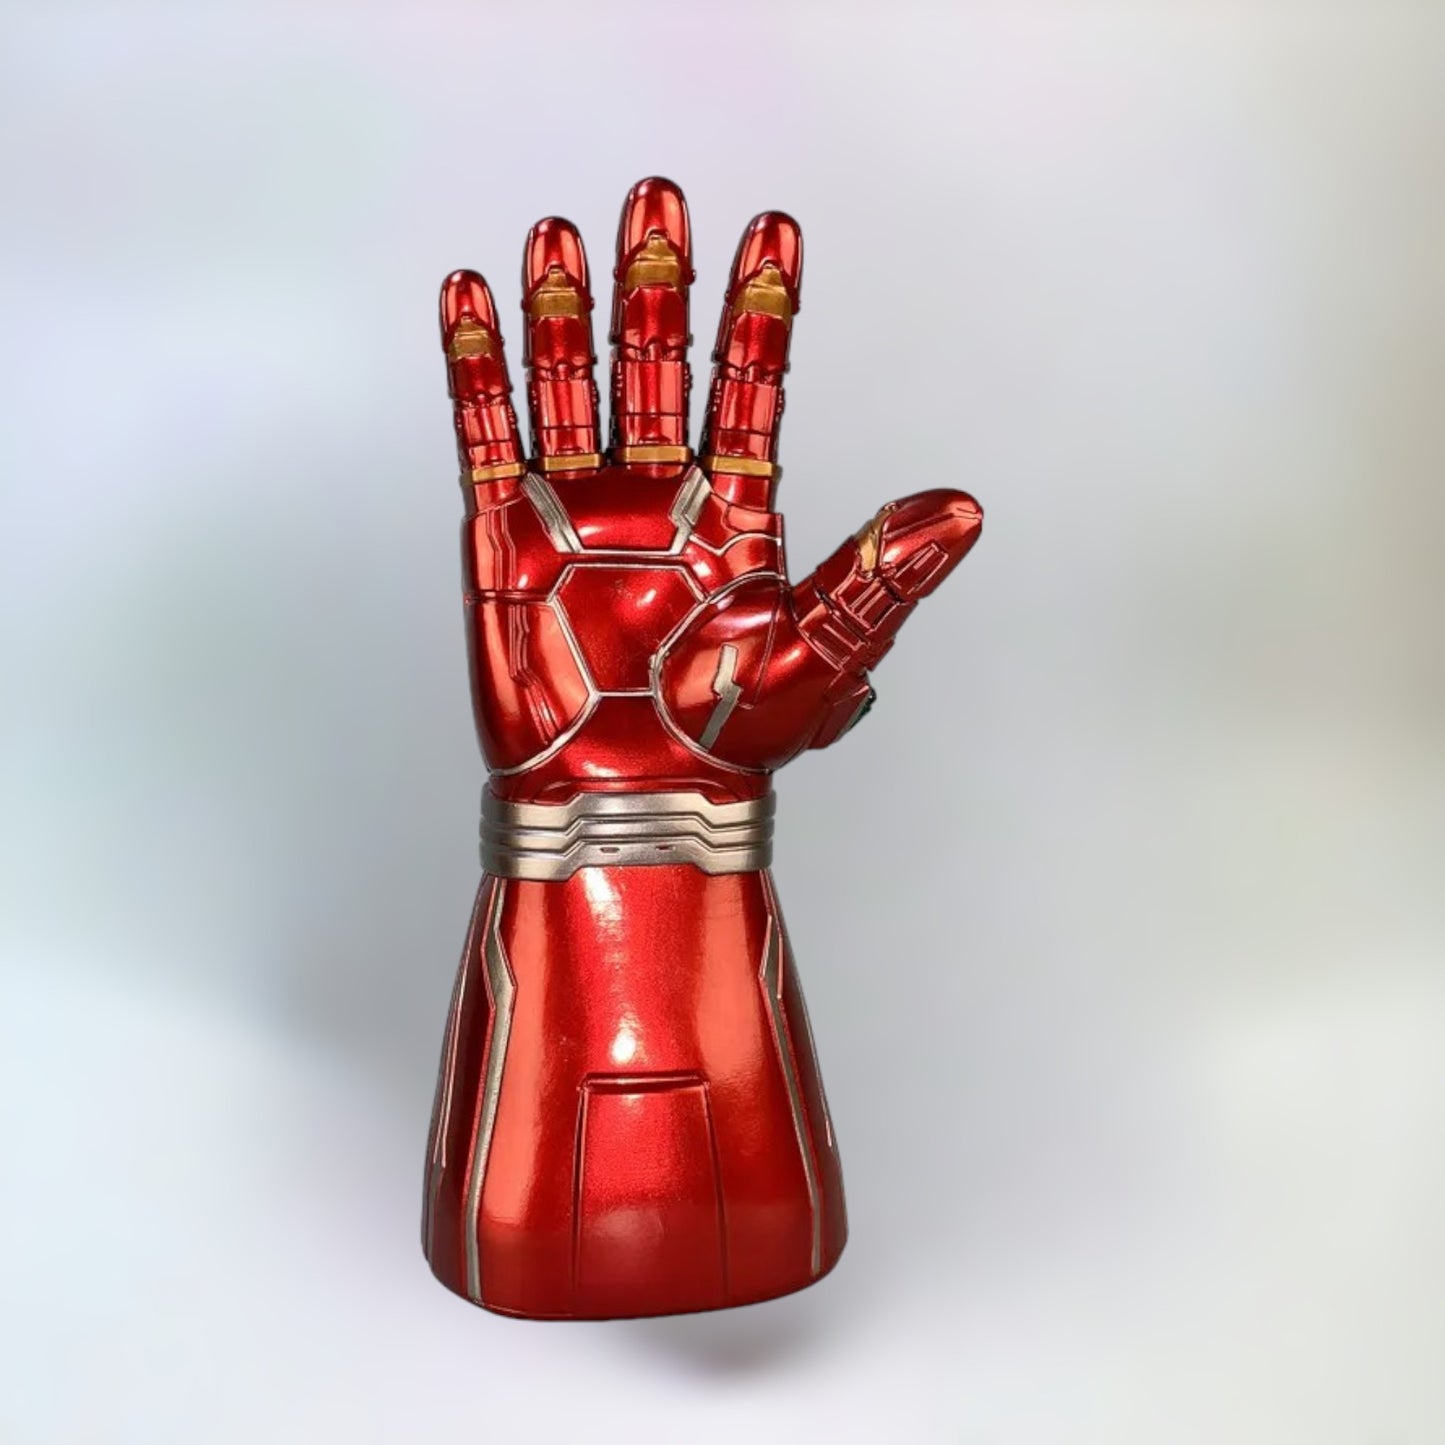 Ironman infinity gauntlet replica toy back side view with plain white background